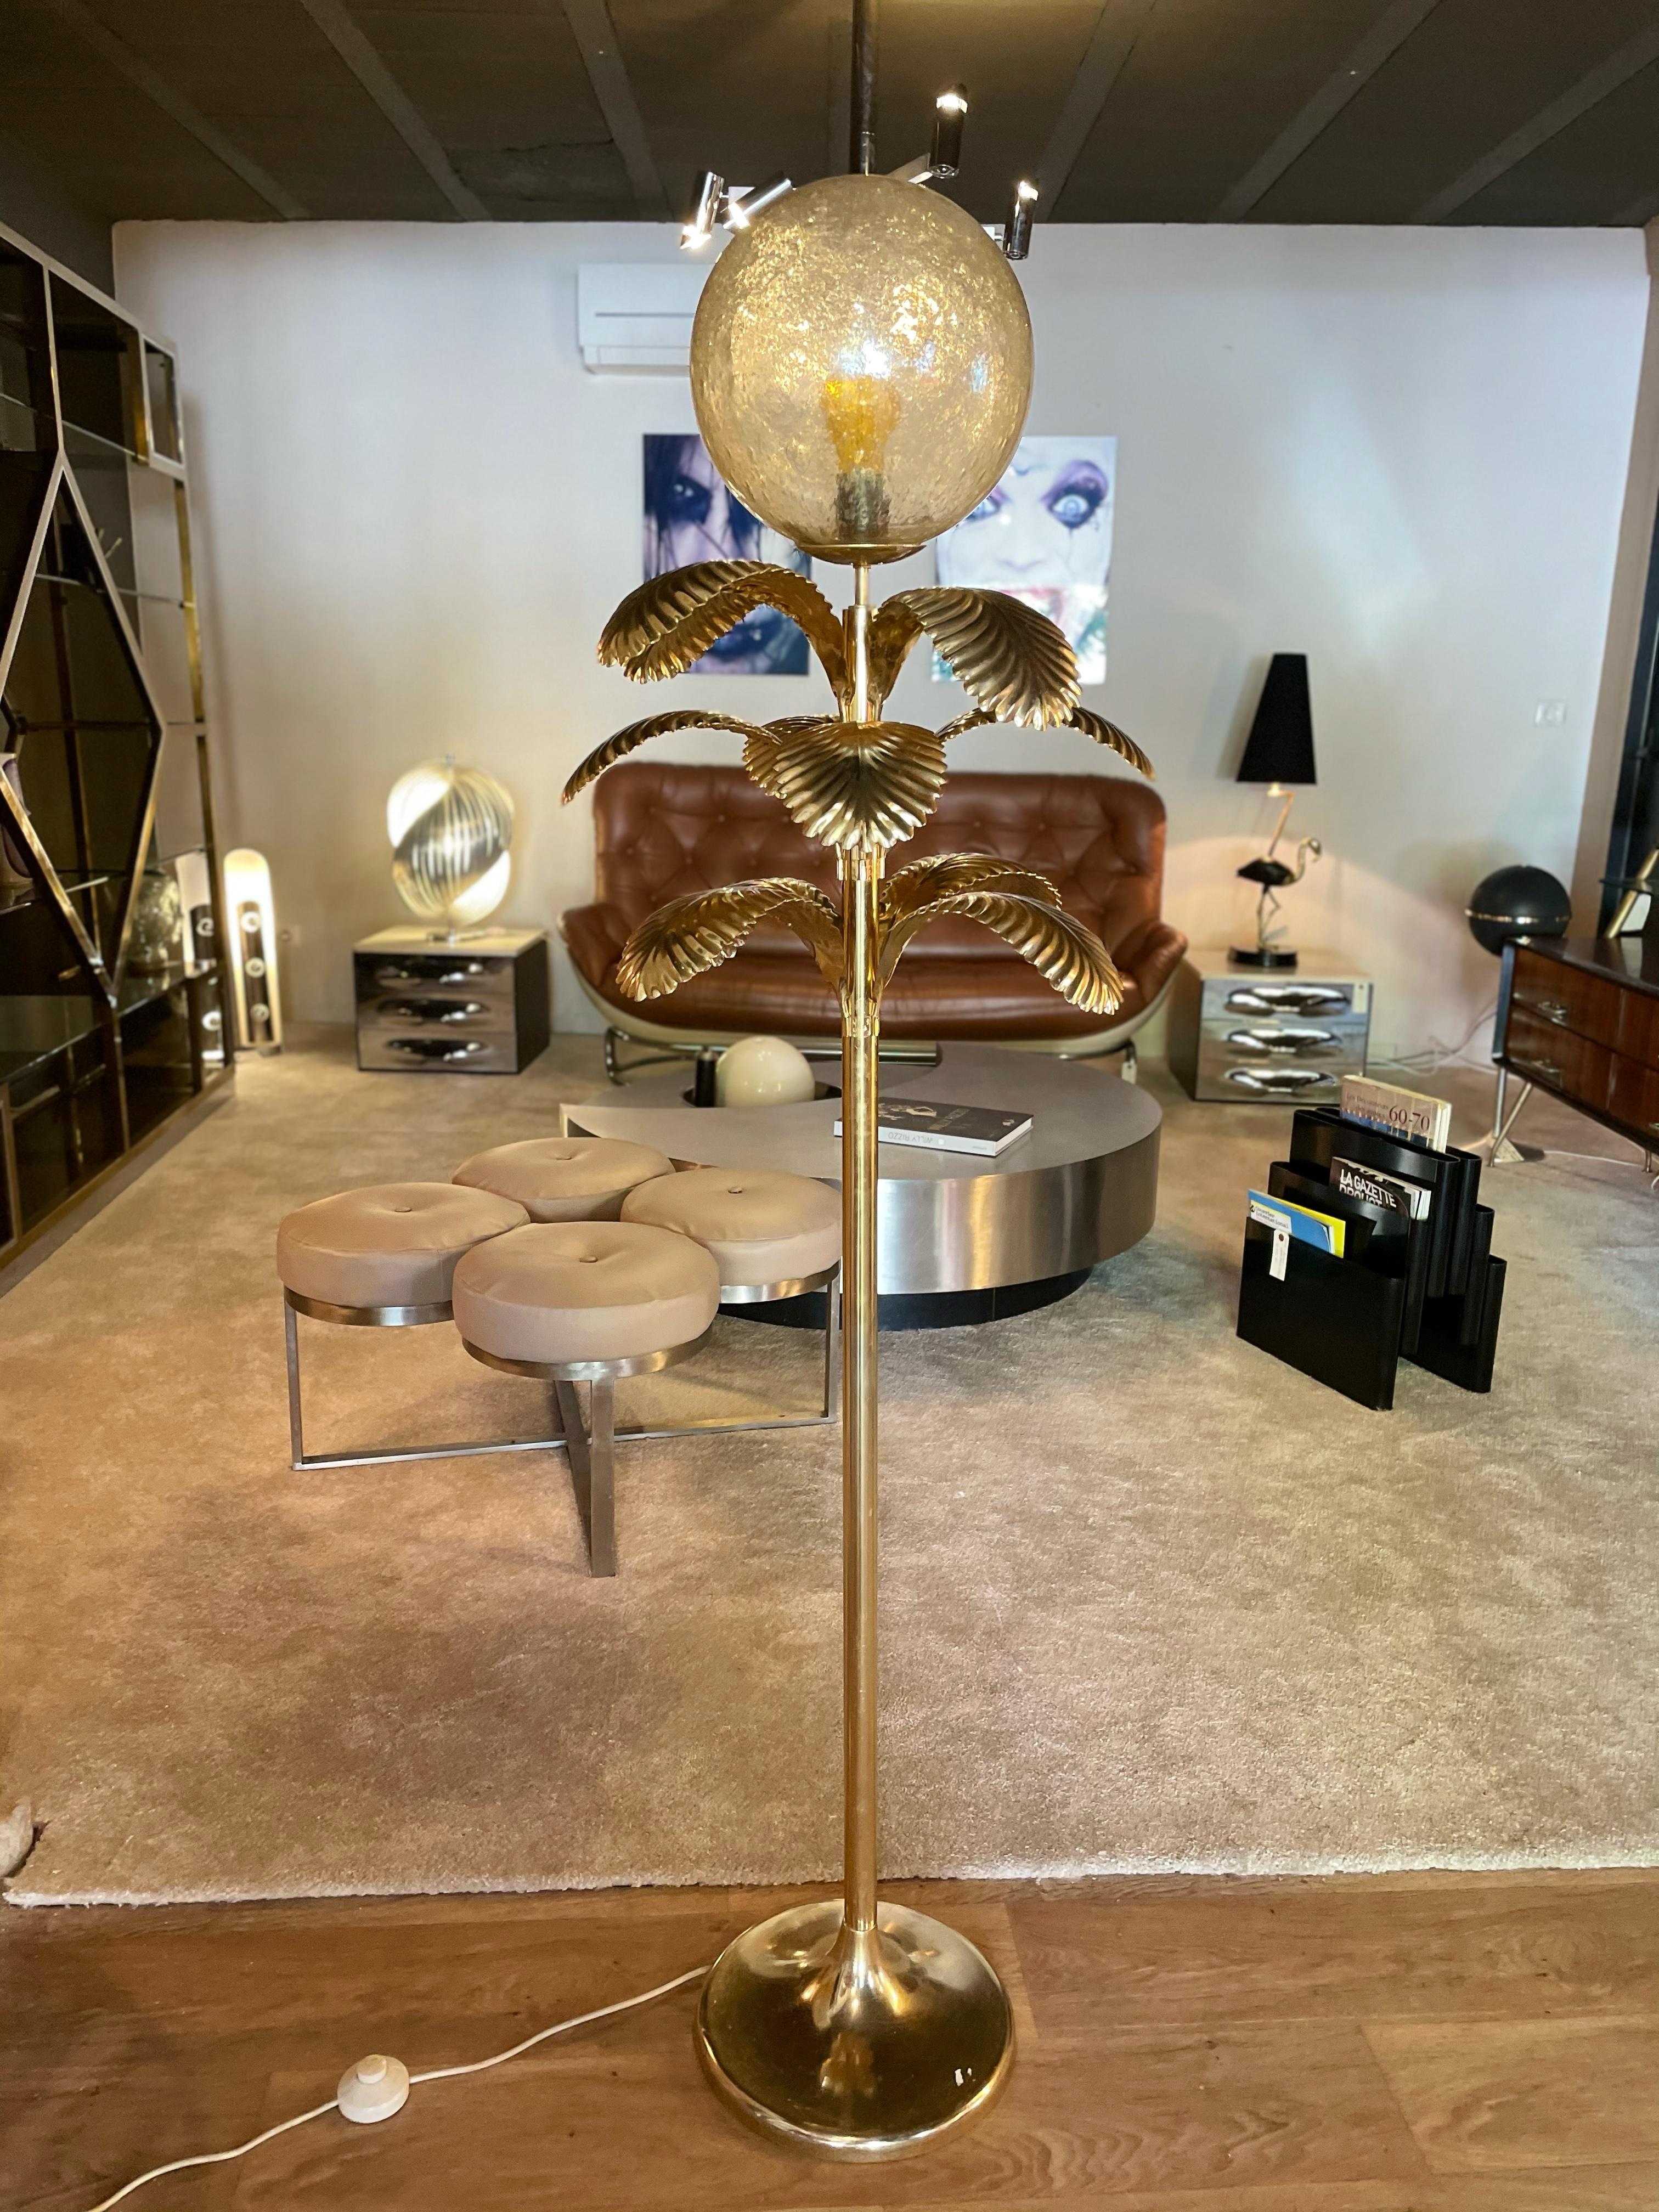 Floor lamp designed by Hans Kögl 
Excellent condition.
For an interior seventies, pop, sixties, regency, rococo, 1950, 1960, 1970, mid-century
In the style of Willy Rizzo, Knoll, Ico Parisi, Romeo Rega, Eames. Raymon Loewy, Guzzini, Joe COLOMBO,